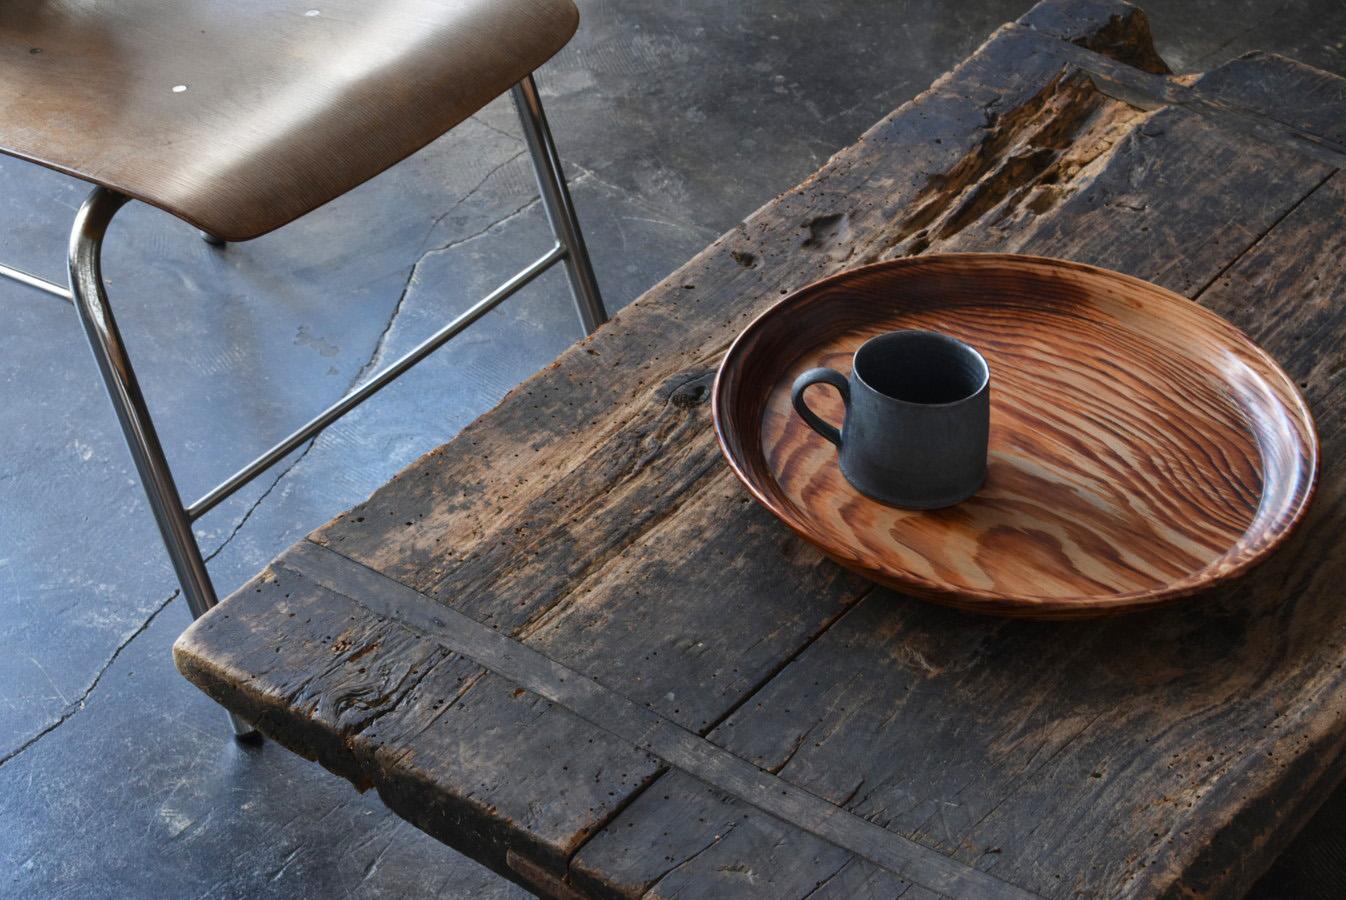 This tray is made of pine wood with beautiful grain.
In Japan, many round and square wooden trays have been made since ancient times.
They come in various sizes and materials.
Among them, pine wood is relatively used.
Pine contains a lot of oil,